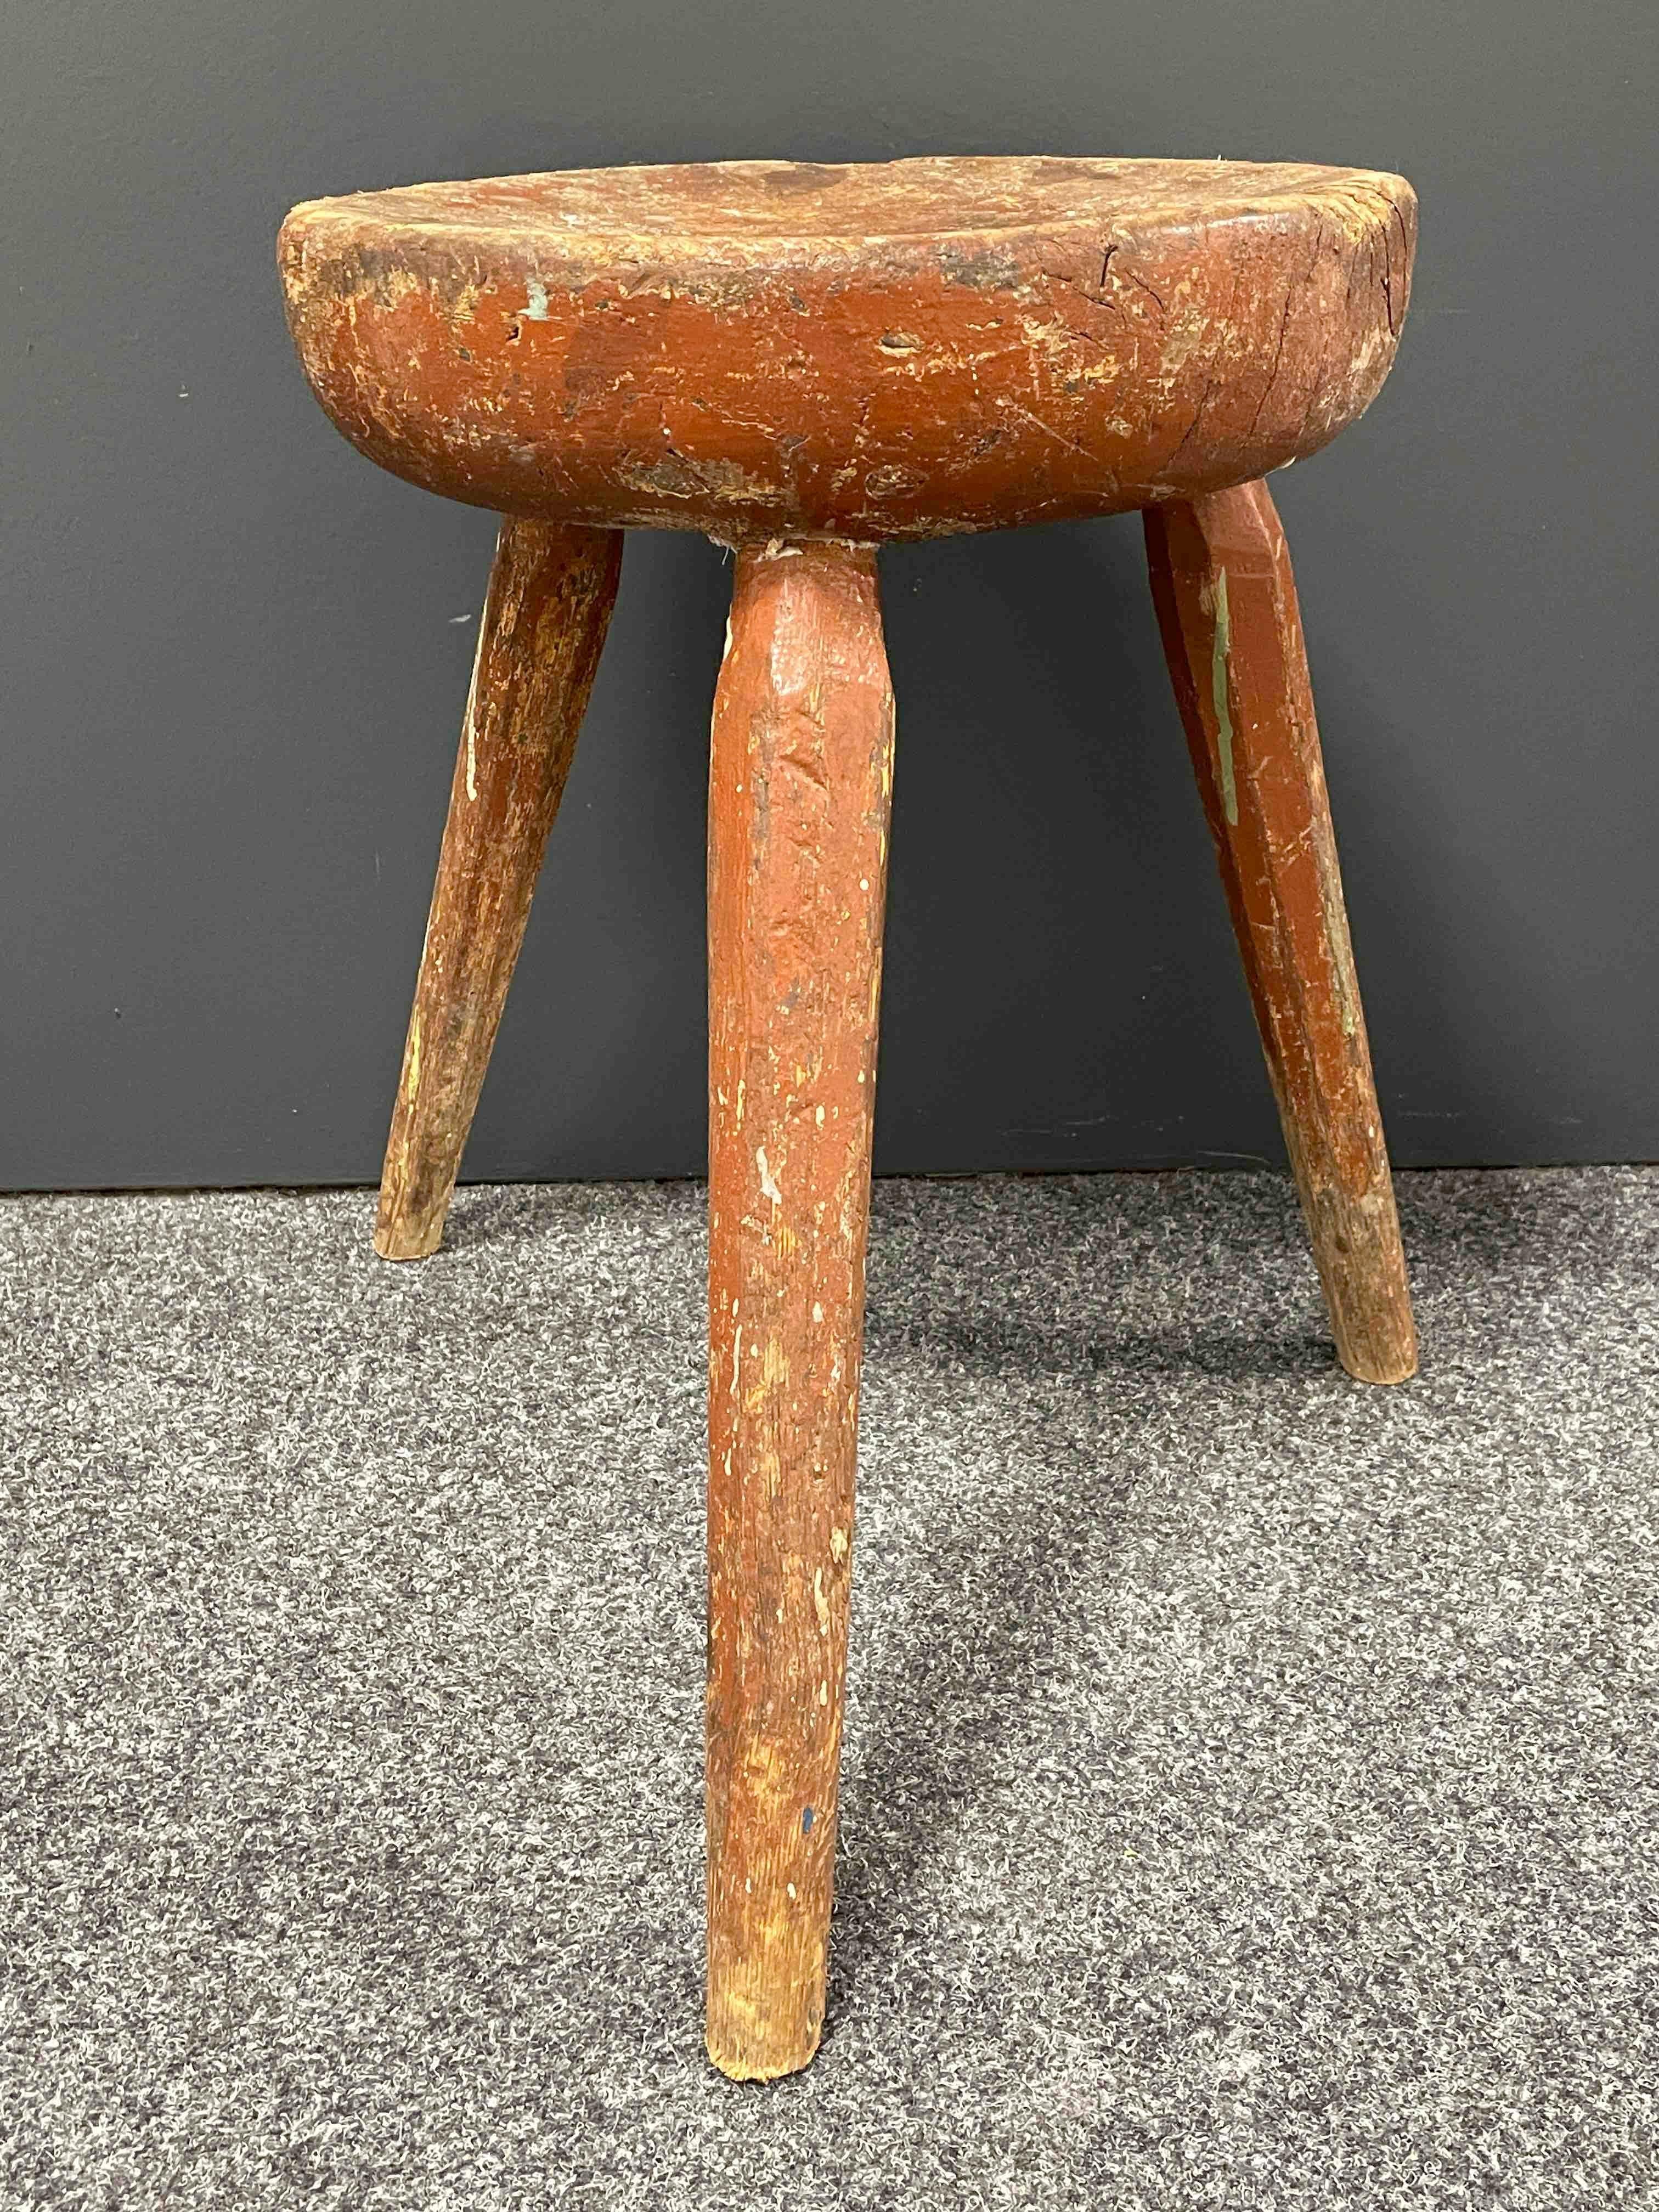 Classic 1900s or older, wood stool. Nice addition to your room, entry hall or patio. Made of wood, hand carved. Found at an estate sale in Vienna, Austria.